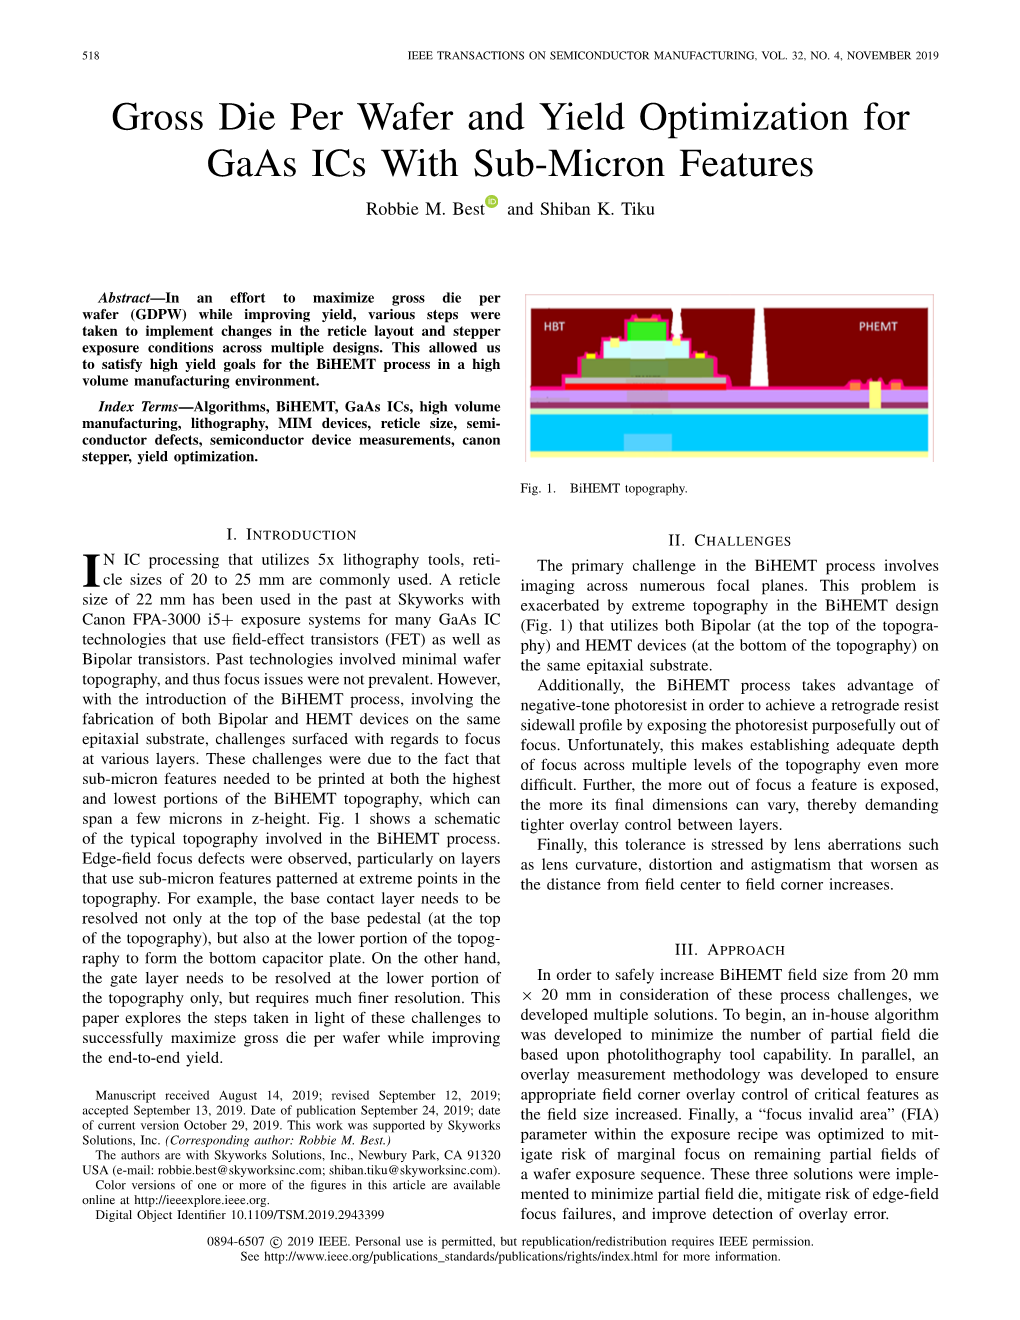 Gross Die Per Wafer and Yield Optimization for Gaas Ics with Sub-Micron Features Robbie M